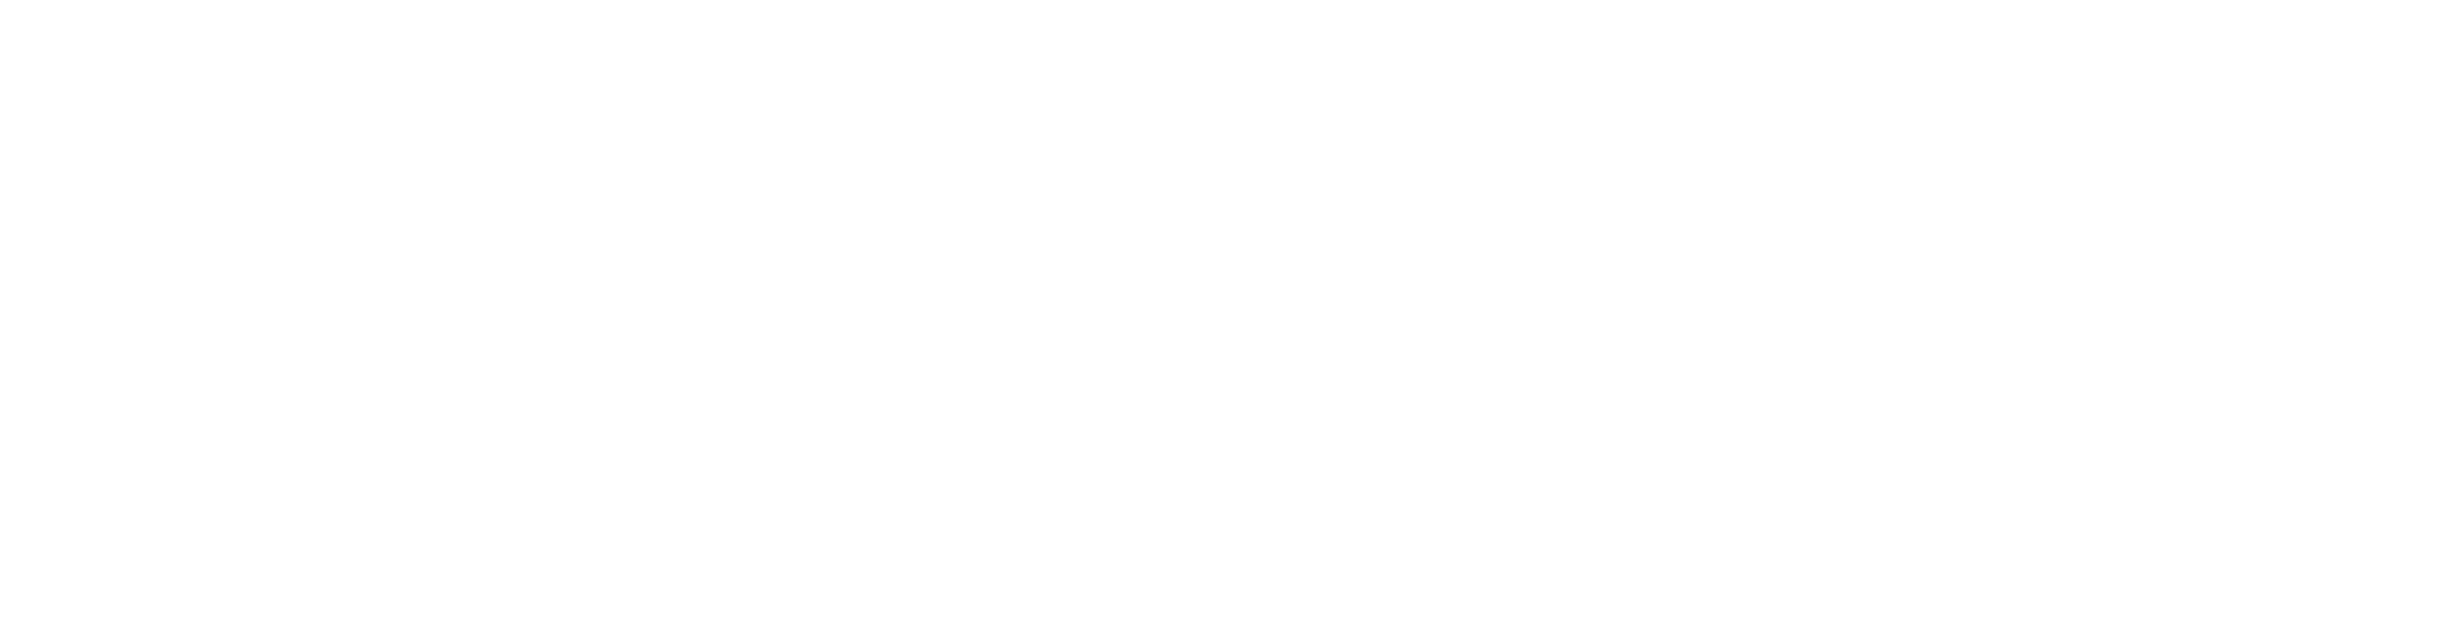 Name of the event, Starry Night, in a scripted font.